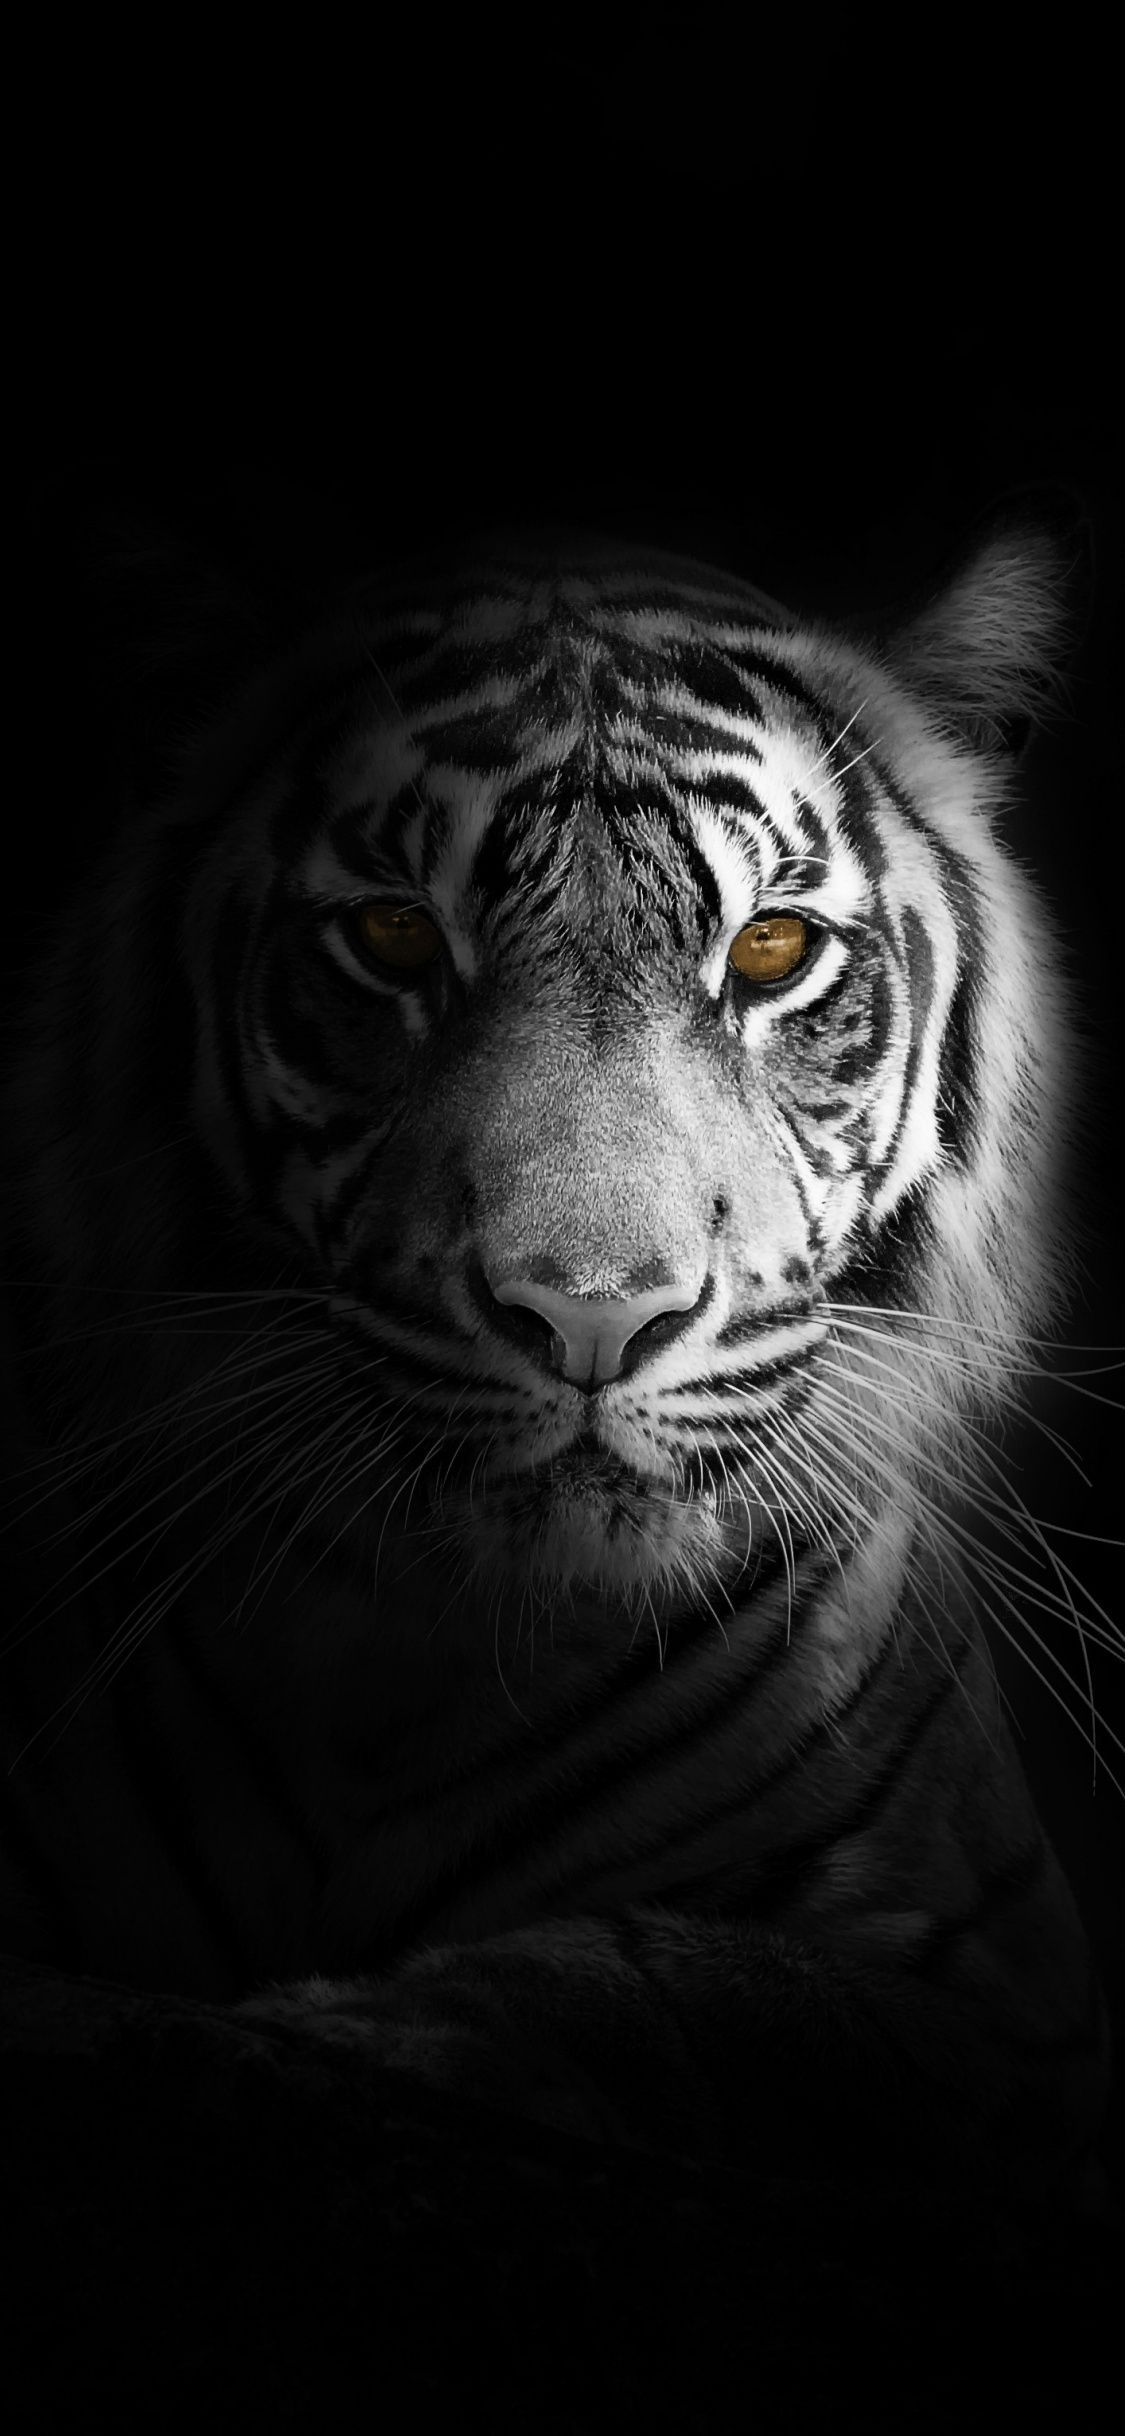 White Tiger iPhone Wallpaper Free White Tiger iPhone Background